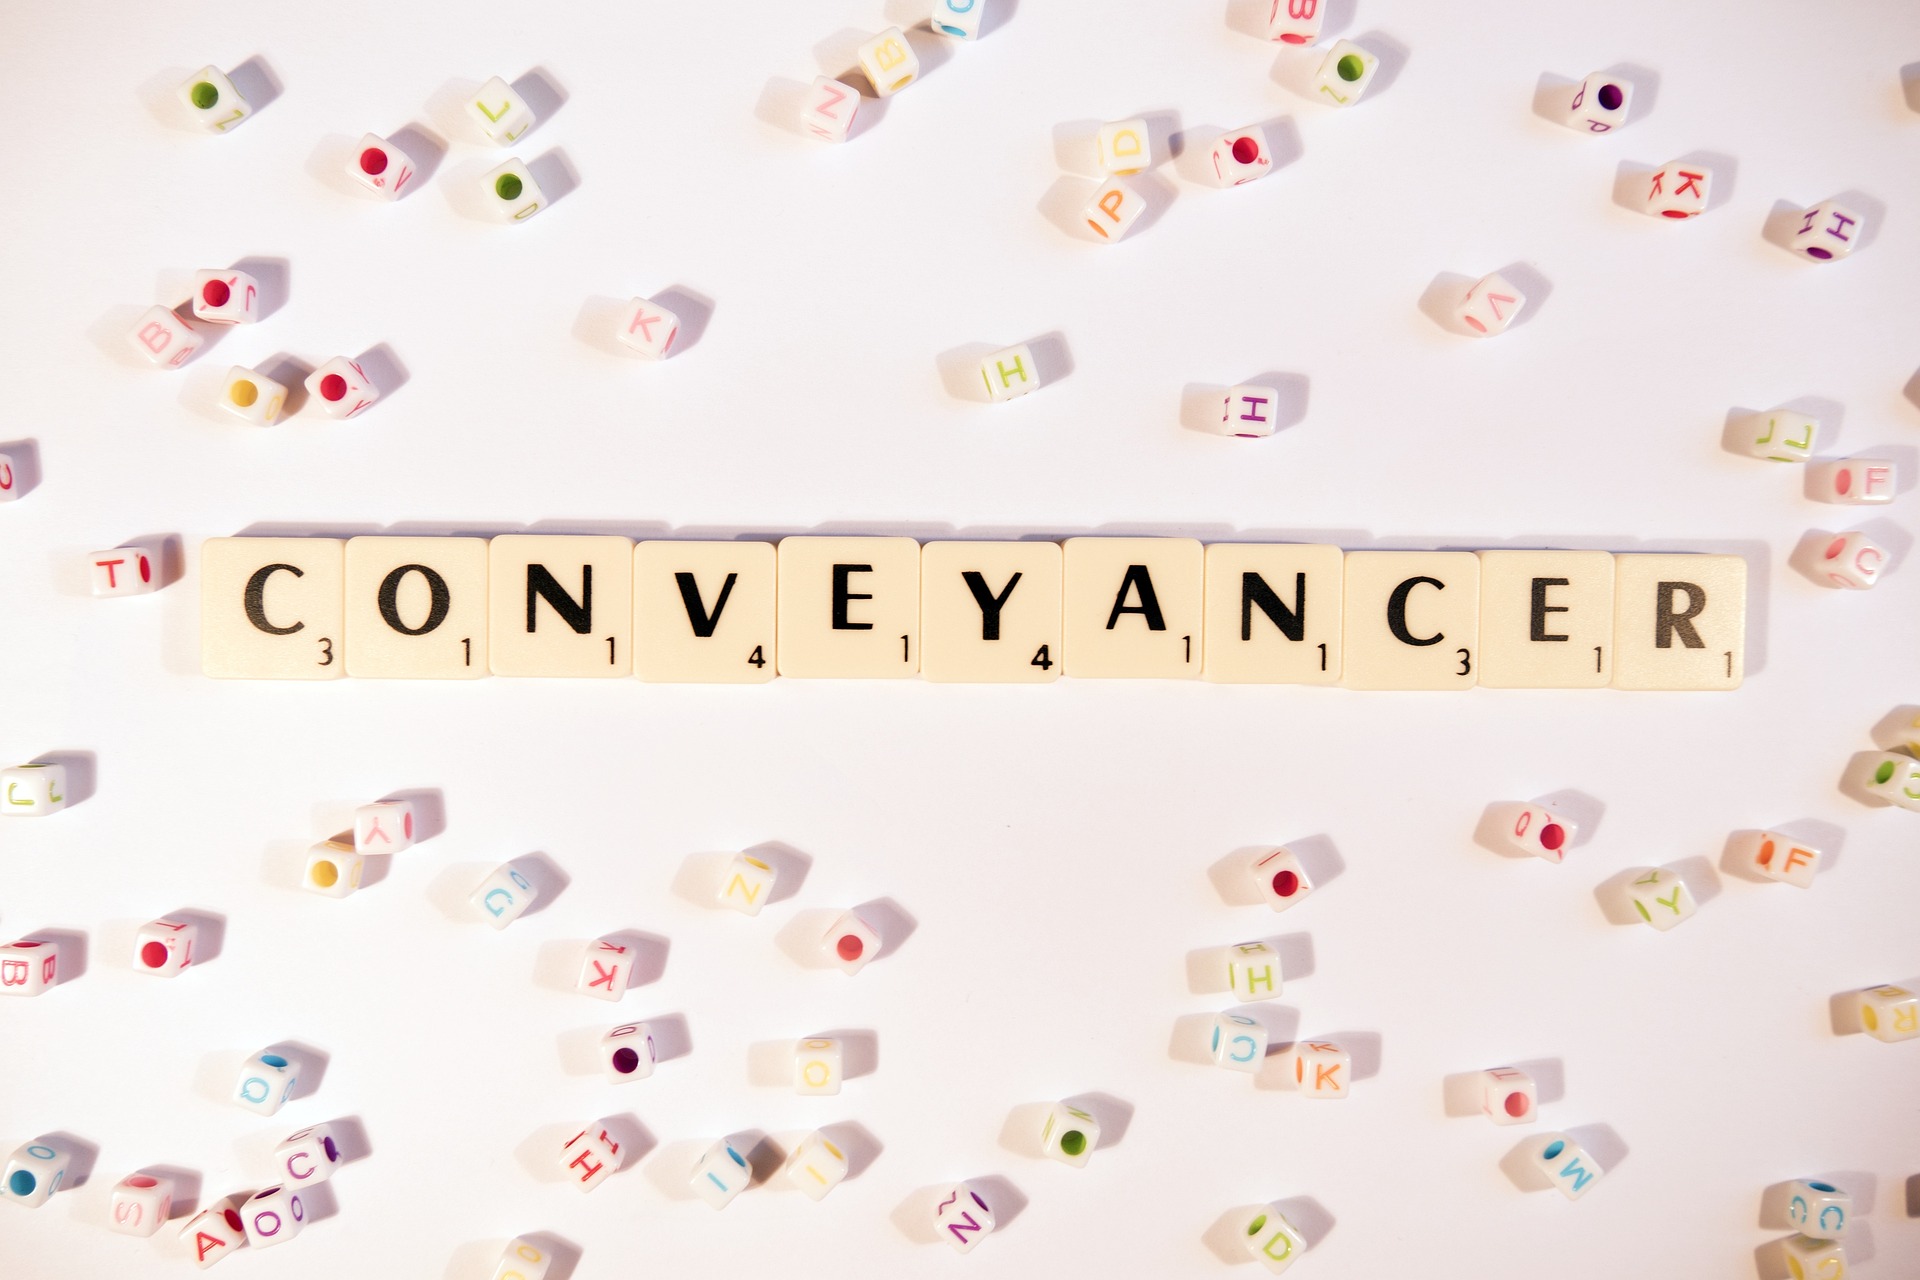 "Conveyancer" in scrabble tiles; our